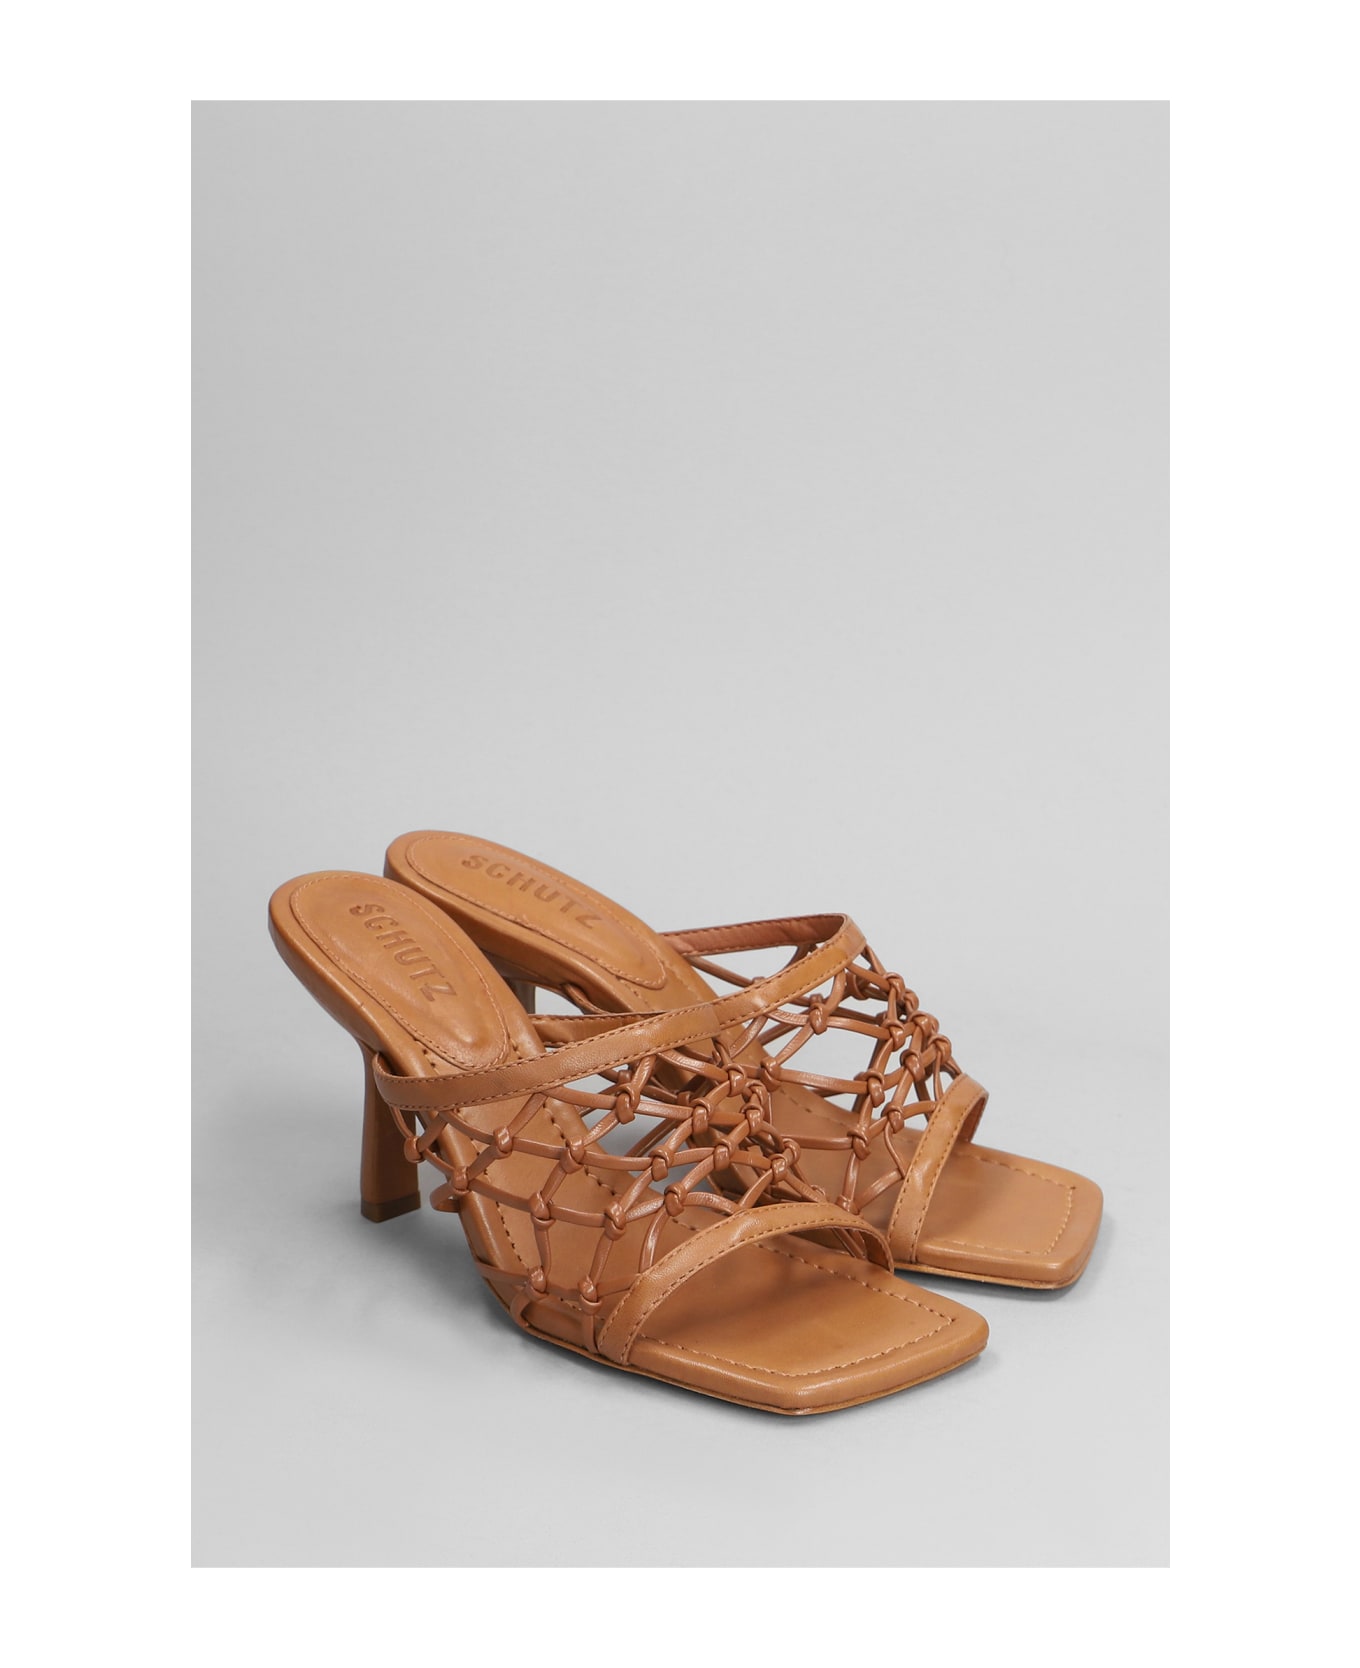 Schutz Slipper-mule In Leather Color Leather - leather color